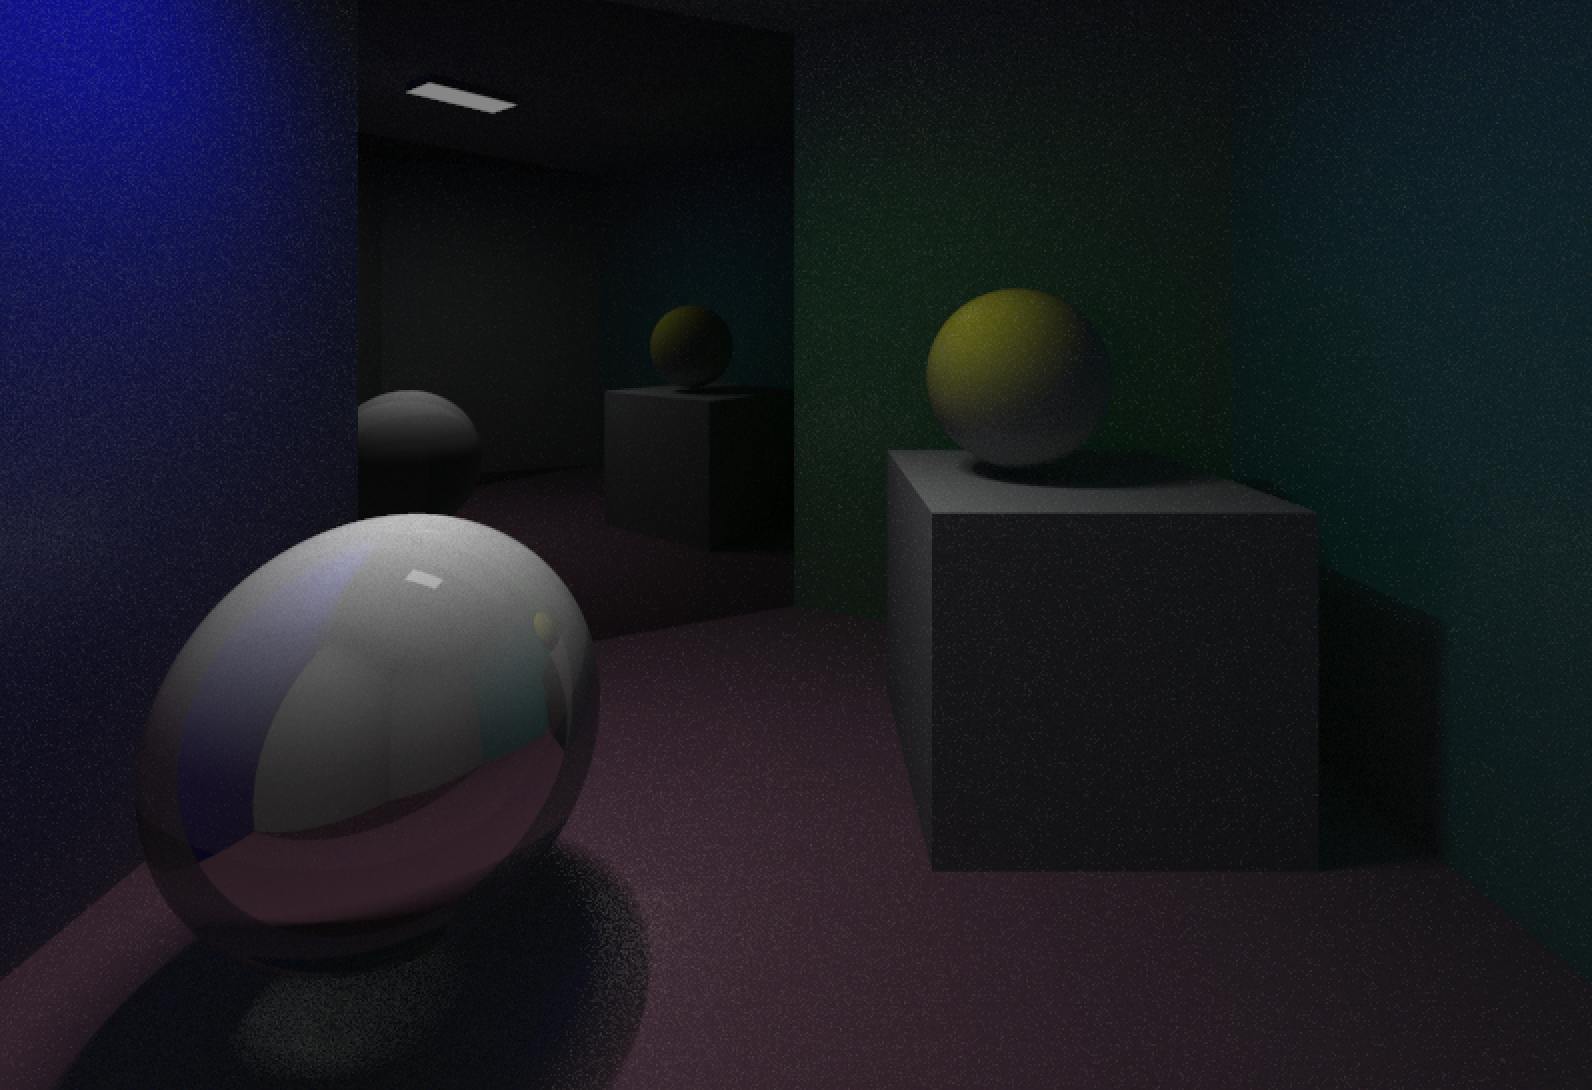 Monte Carlo Ray Tracer